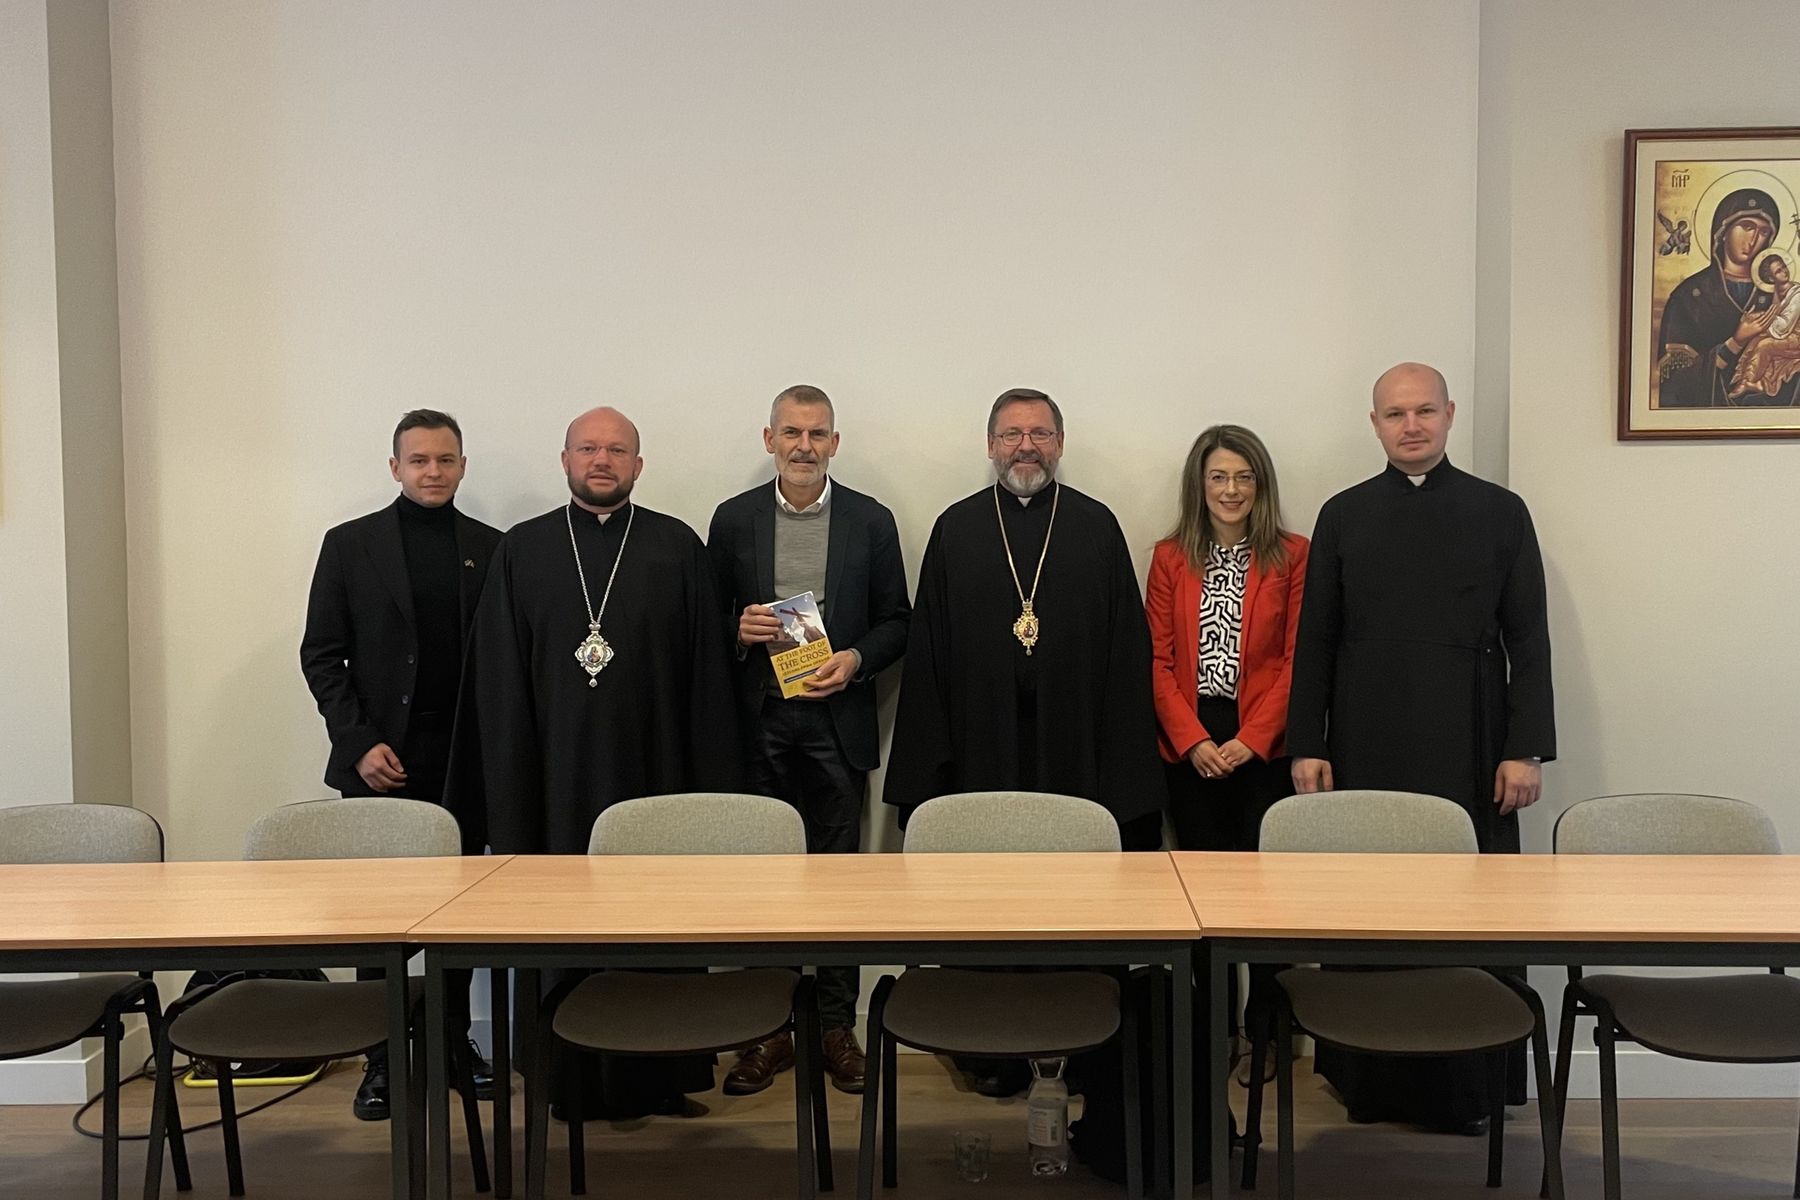 The Conference of European Churches (Brussels) discussed the religious situation in Ukraine